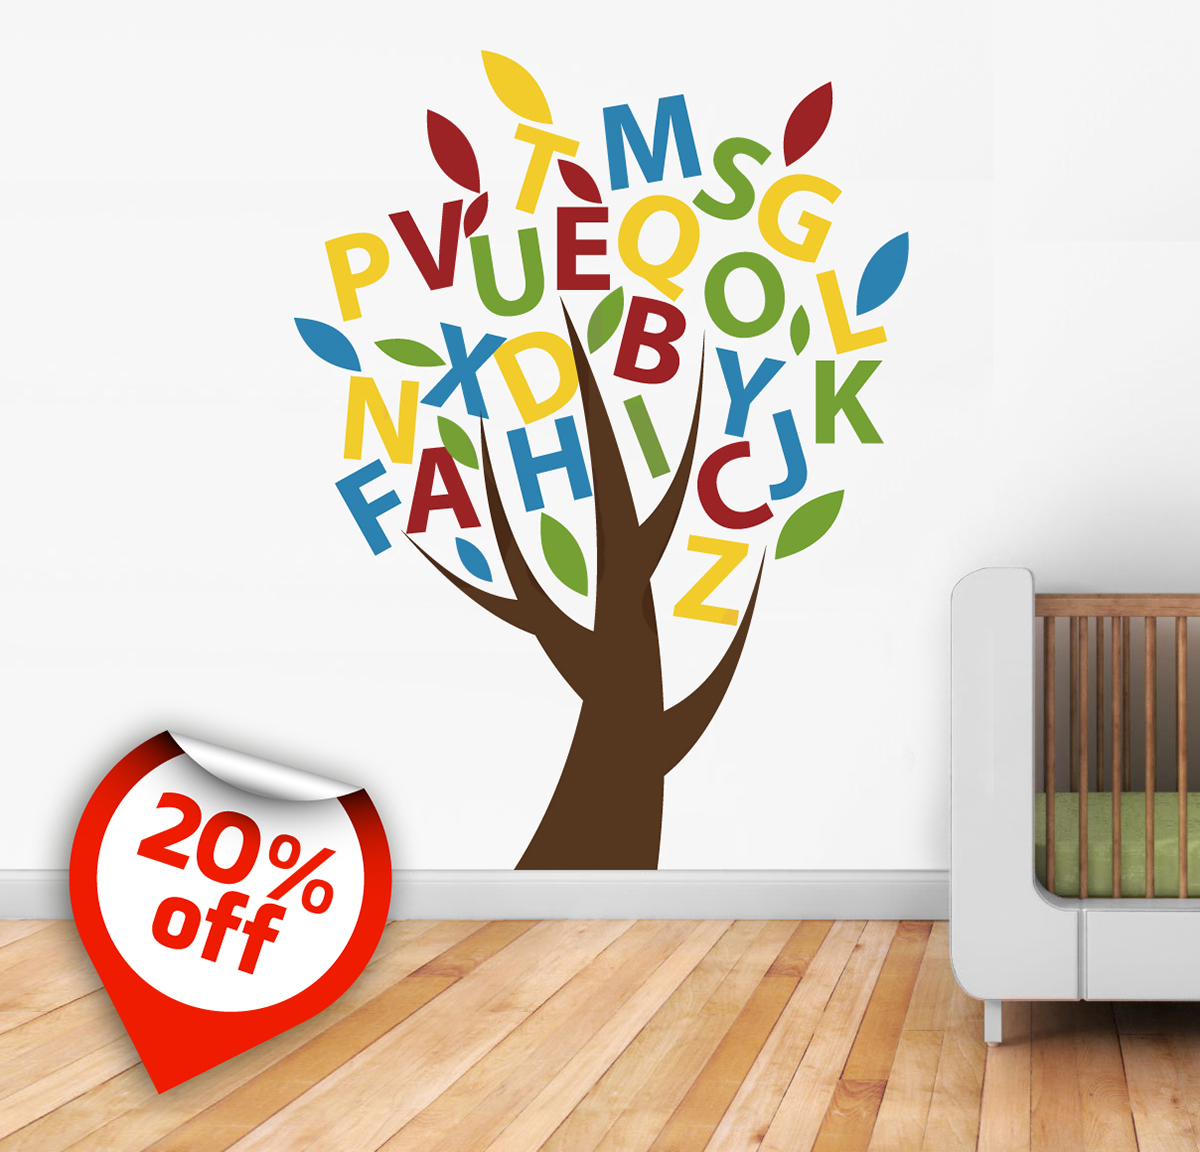 sale  vinyl impression discount code behance discount  coupon  easter sale easter weekend vinyl wall art stickers decals childrens bedroom kitchen bathroom hallway livingroom blank surface Character Unique apreciate COUPON discount Deal free prosite Colourful  summer winter spring autumn green red blue orange purple Baby Blue nursary playroom celing skirting desk Office home teens Students babies Newborns babes business sugar sweet fresh decorative artistic removable school impression edward currer UK black dots logo design Interior inspiration ideas kids new elements freebie wall decals wall stickers decor decoration giant sticker decal designersvisual merchandise graphics digital Young women Urban boys Retail brand Clothing product france French byron Melanie cunningham color pencil pen ink paint development presentation Surf skateboard identity SILK screen t-shirts icons streetwear magazine mix medium visual artist visual presentation presentation artist illustration designer Illustrative merchandising fashion apparel contemporary apparel textile Project management technical abilities Display 3D Collateral 2D print manufacturing Embroidery stitching sewing paper construction posters adventure retail interiors fine art boobs characters cartoon editorial fantasy sexual hip hop hip-hop Custom custom design grunge concert band mixed media mixed media silkscreen dimensional prop fabrication Illustrator vector vector art photoshop decorate craft Artistry glyphs iconoclastic symbol monster skull deviant famous comic japanese japanese monsters robot shogun kaiju Circus punk Flames tags Candy jar kitten Cat clouds thunder lightning and lightnings lab laboratory science lab science laboratory starts clouds and stars fork bento box jar of Brains brain jar bubbles hears Bubbly hearts Swirls swooshes movement candy lab Fun exclamation mark fat cat fat Super Hero goo beaker science evil science evil lab evil candy sketchels 80s 80's eighties tv manga Comix pixel atari tentacles stylized silo Silhouette bat 8-bit 8 bit Eight bit splatter naked underwater flesh tear torn flesh mash-up mash up REMIX social network Island japan godzilla toys new yorker electric tools taiwan gallery Collaboration eyeballs tongue flys tights arrows drips pitch fork tail nude topless bare sex storm clouds scissors stock geometric CMYK evil eye constructed waves Flying Spots handcrafted paper dolls snow beast snakes of War Promotional promo bear plush exhibited monkey camouflage wallpaper messenger bag tokyo sunshine gang Entertainment flight adicolor customized funny bone aerosol strain pop culture samples zero degree dream stars Hang tag guerrilla branded reality Body Parts uncle squid video game Retro vintage eco float vert gravity velocity hang time Ramp stripes Pinstripes big Kahuna Flowers Tropical mannequins swim china Marker crown re-branding junior cupid refresh gimme cape HAND LETTERING rainbow smasher bikini girls best cool amazing inspiring funny cute king binary box spin Collective  etsy Dinosaur Nesting tree grey yellow pink violet ice blue baby SKY alphabet Tree  multicoloured nursery nurseries